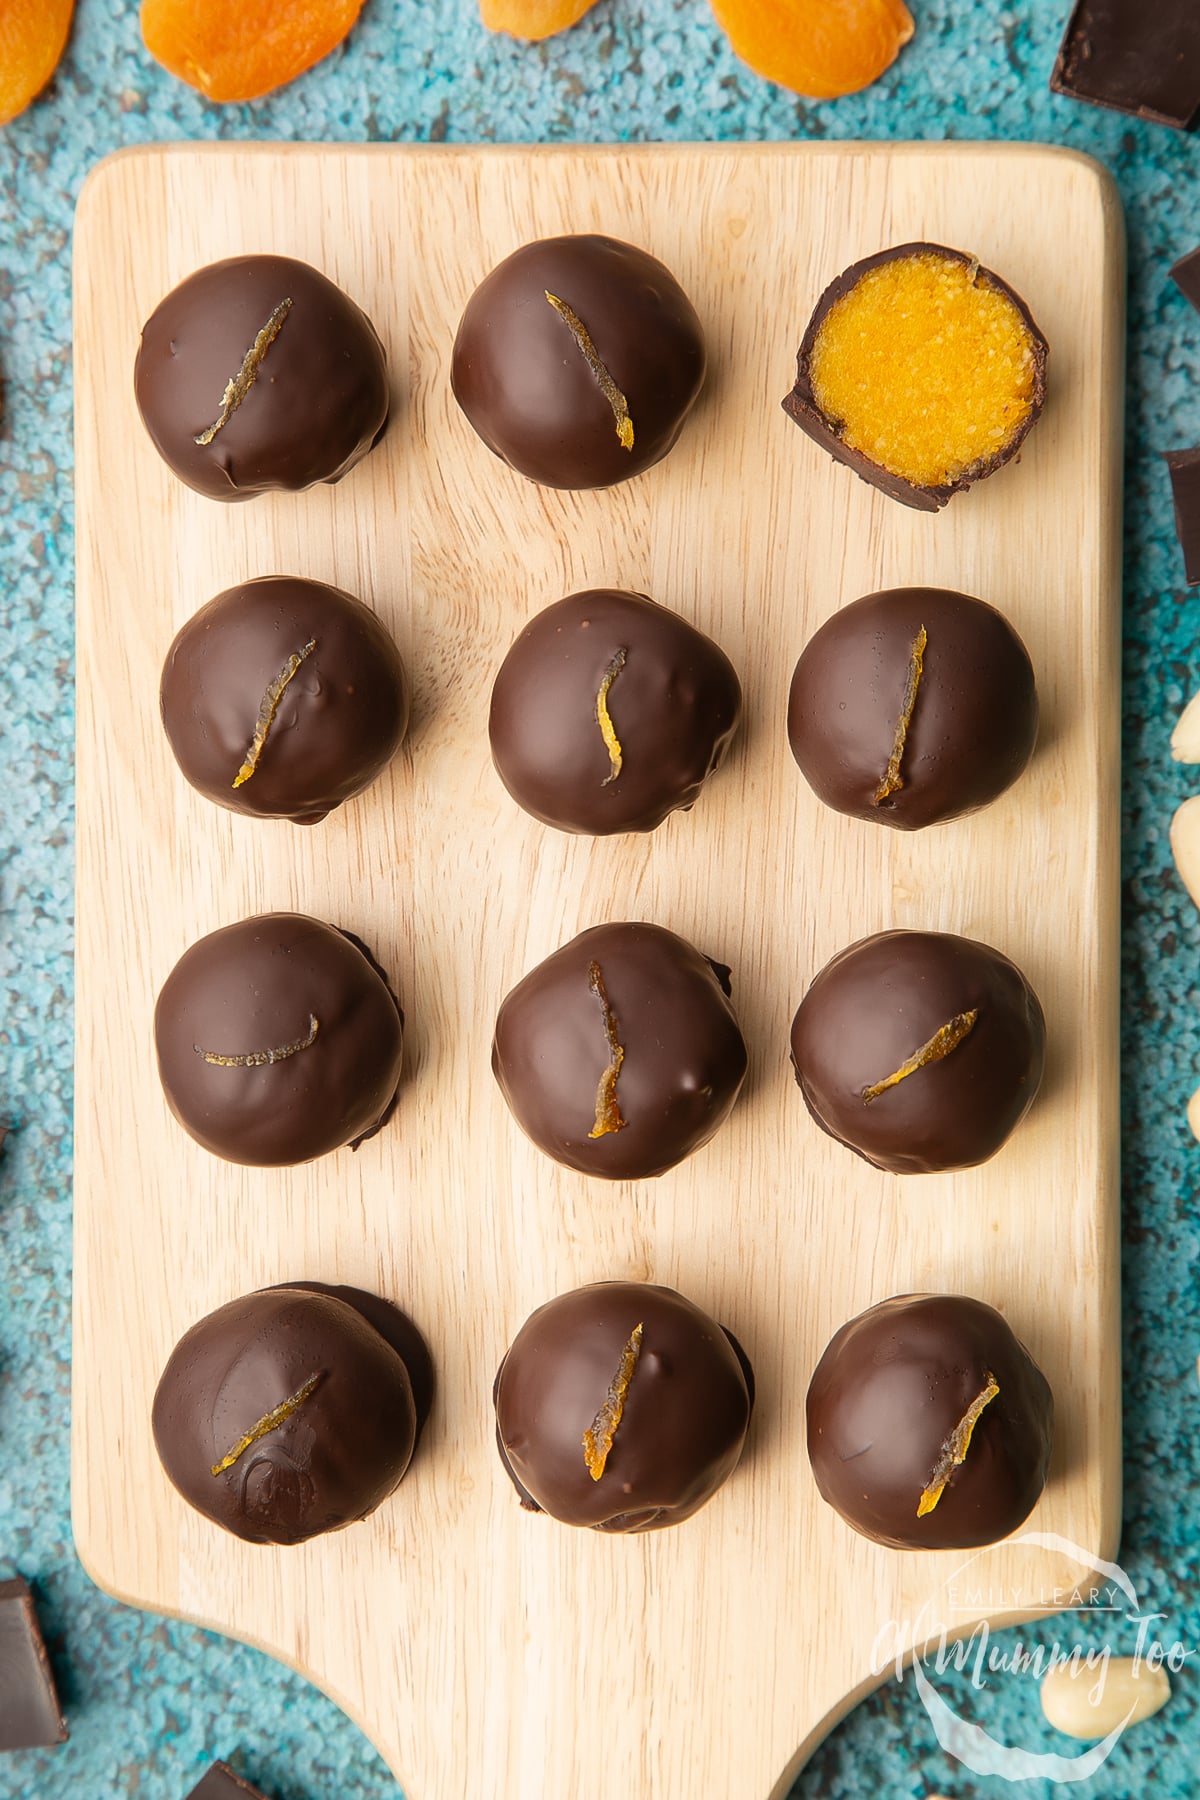 12 chocolate apricot balls arranged on a wooden board, with ingredients around the board. One has been cut in half, revealing the bright orange apricot filling. 